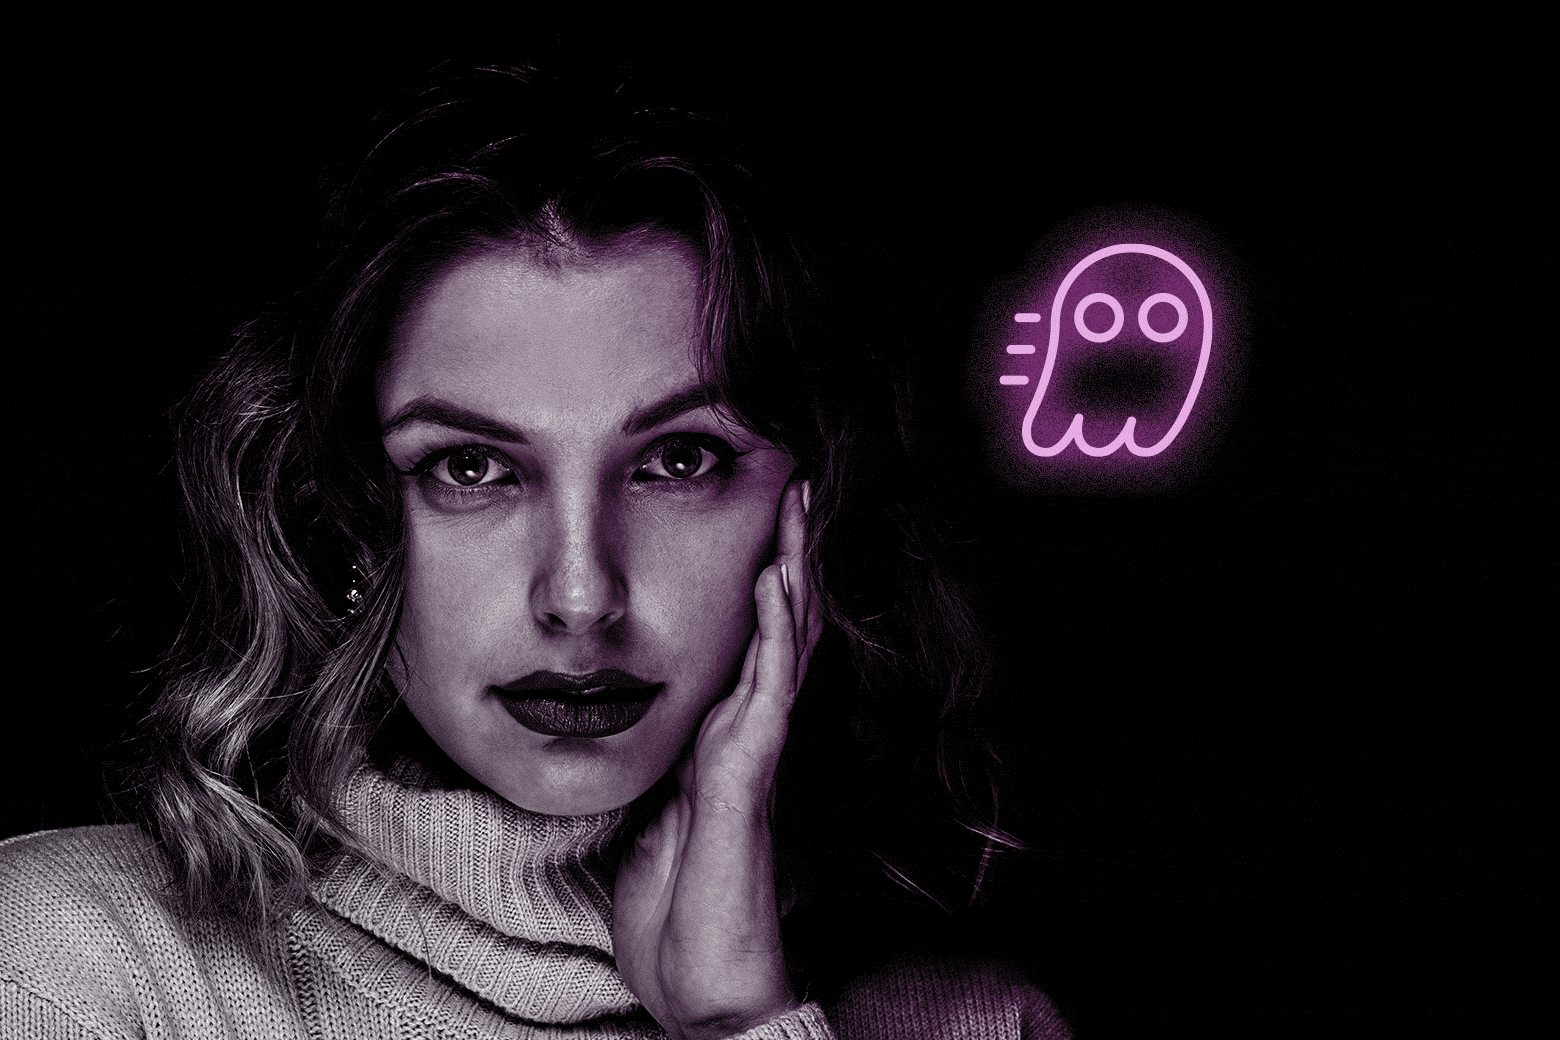 A woman and a ghost emoji.